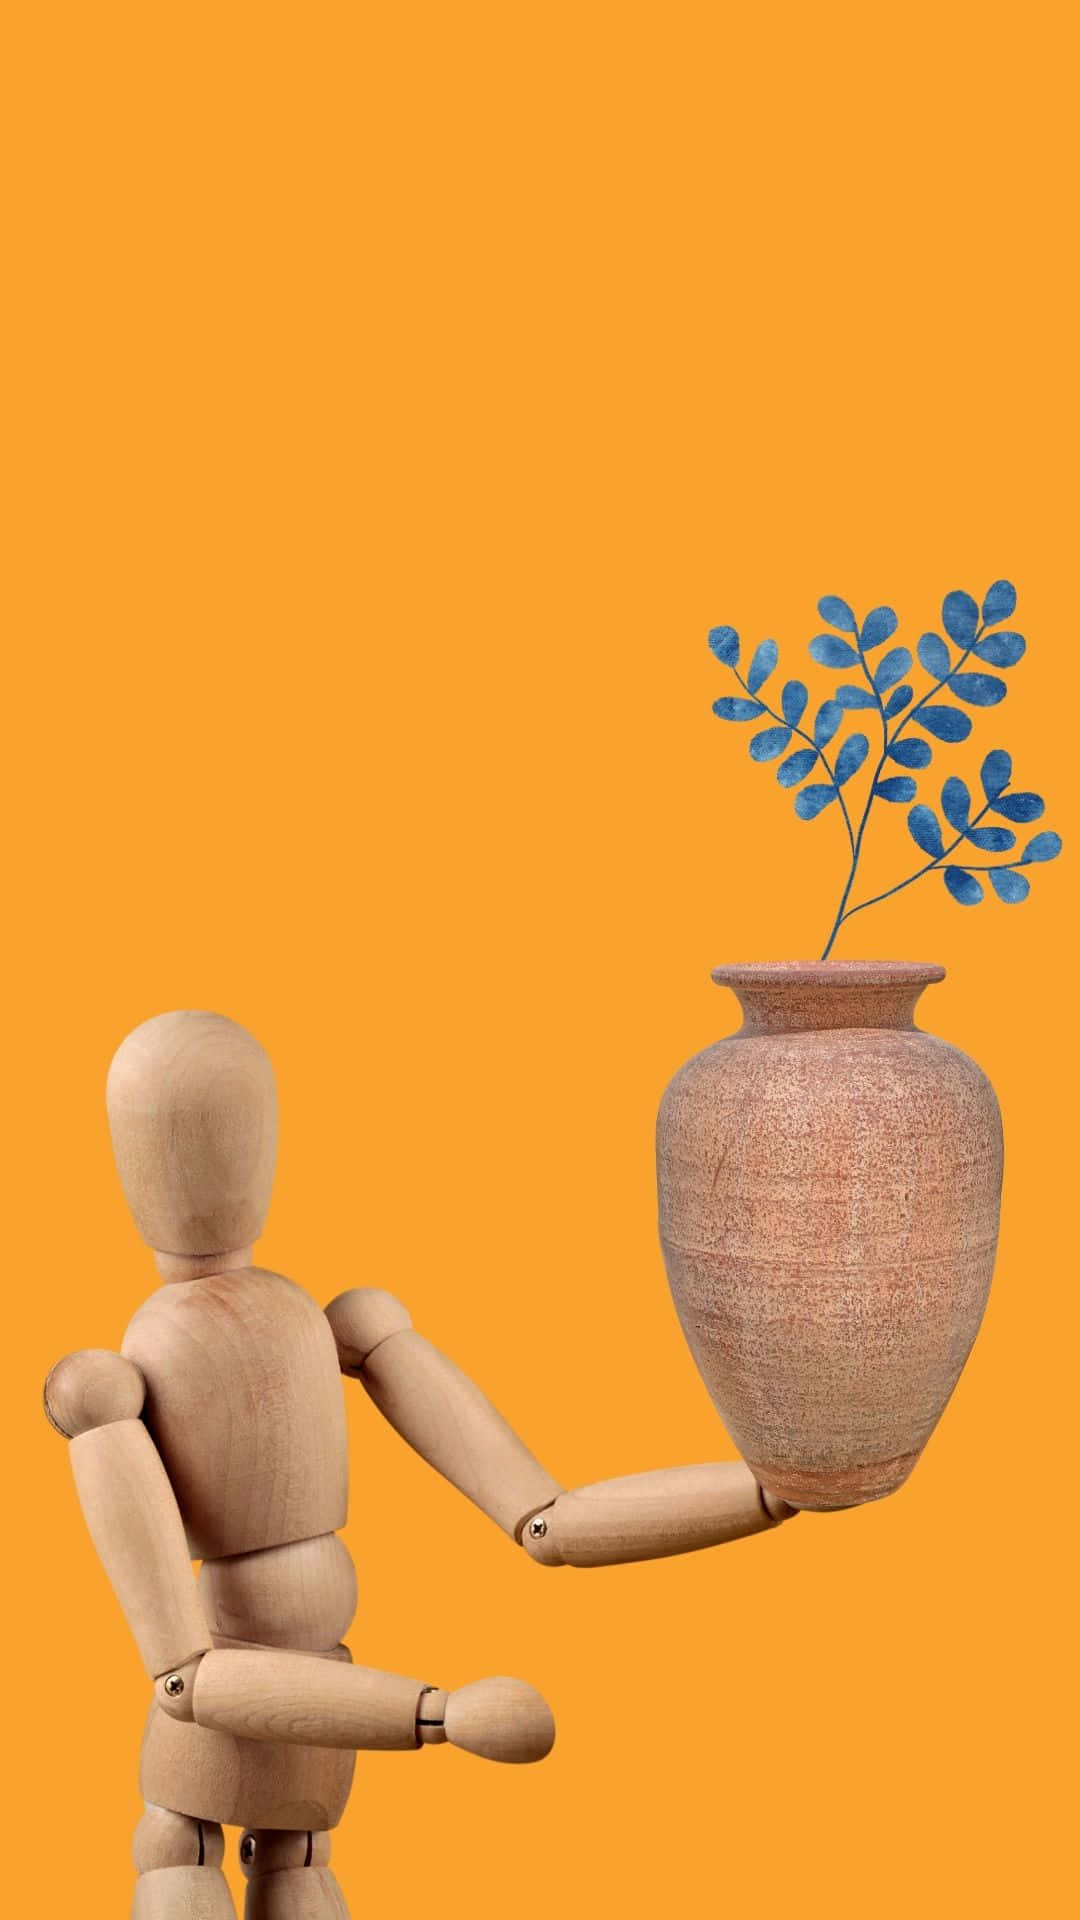 A Wooden Mannequin Holding A Pot Of Plants Background